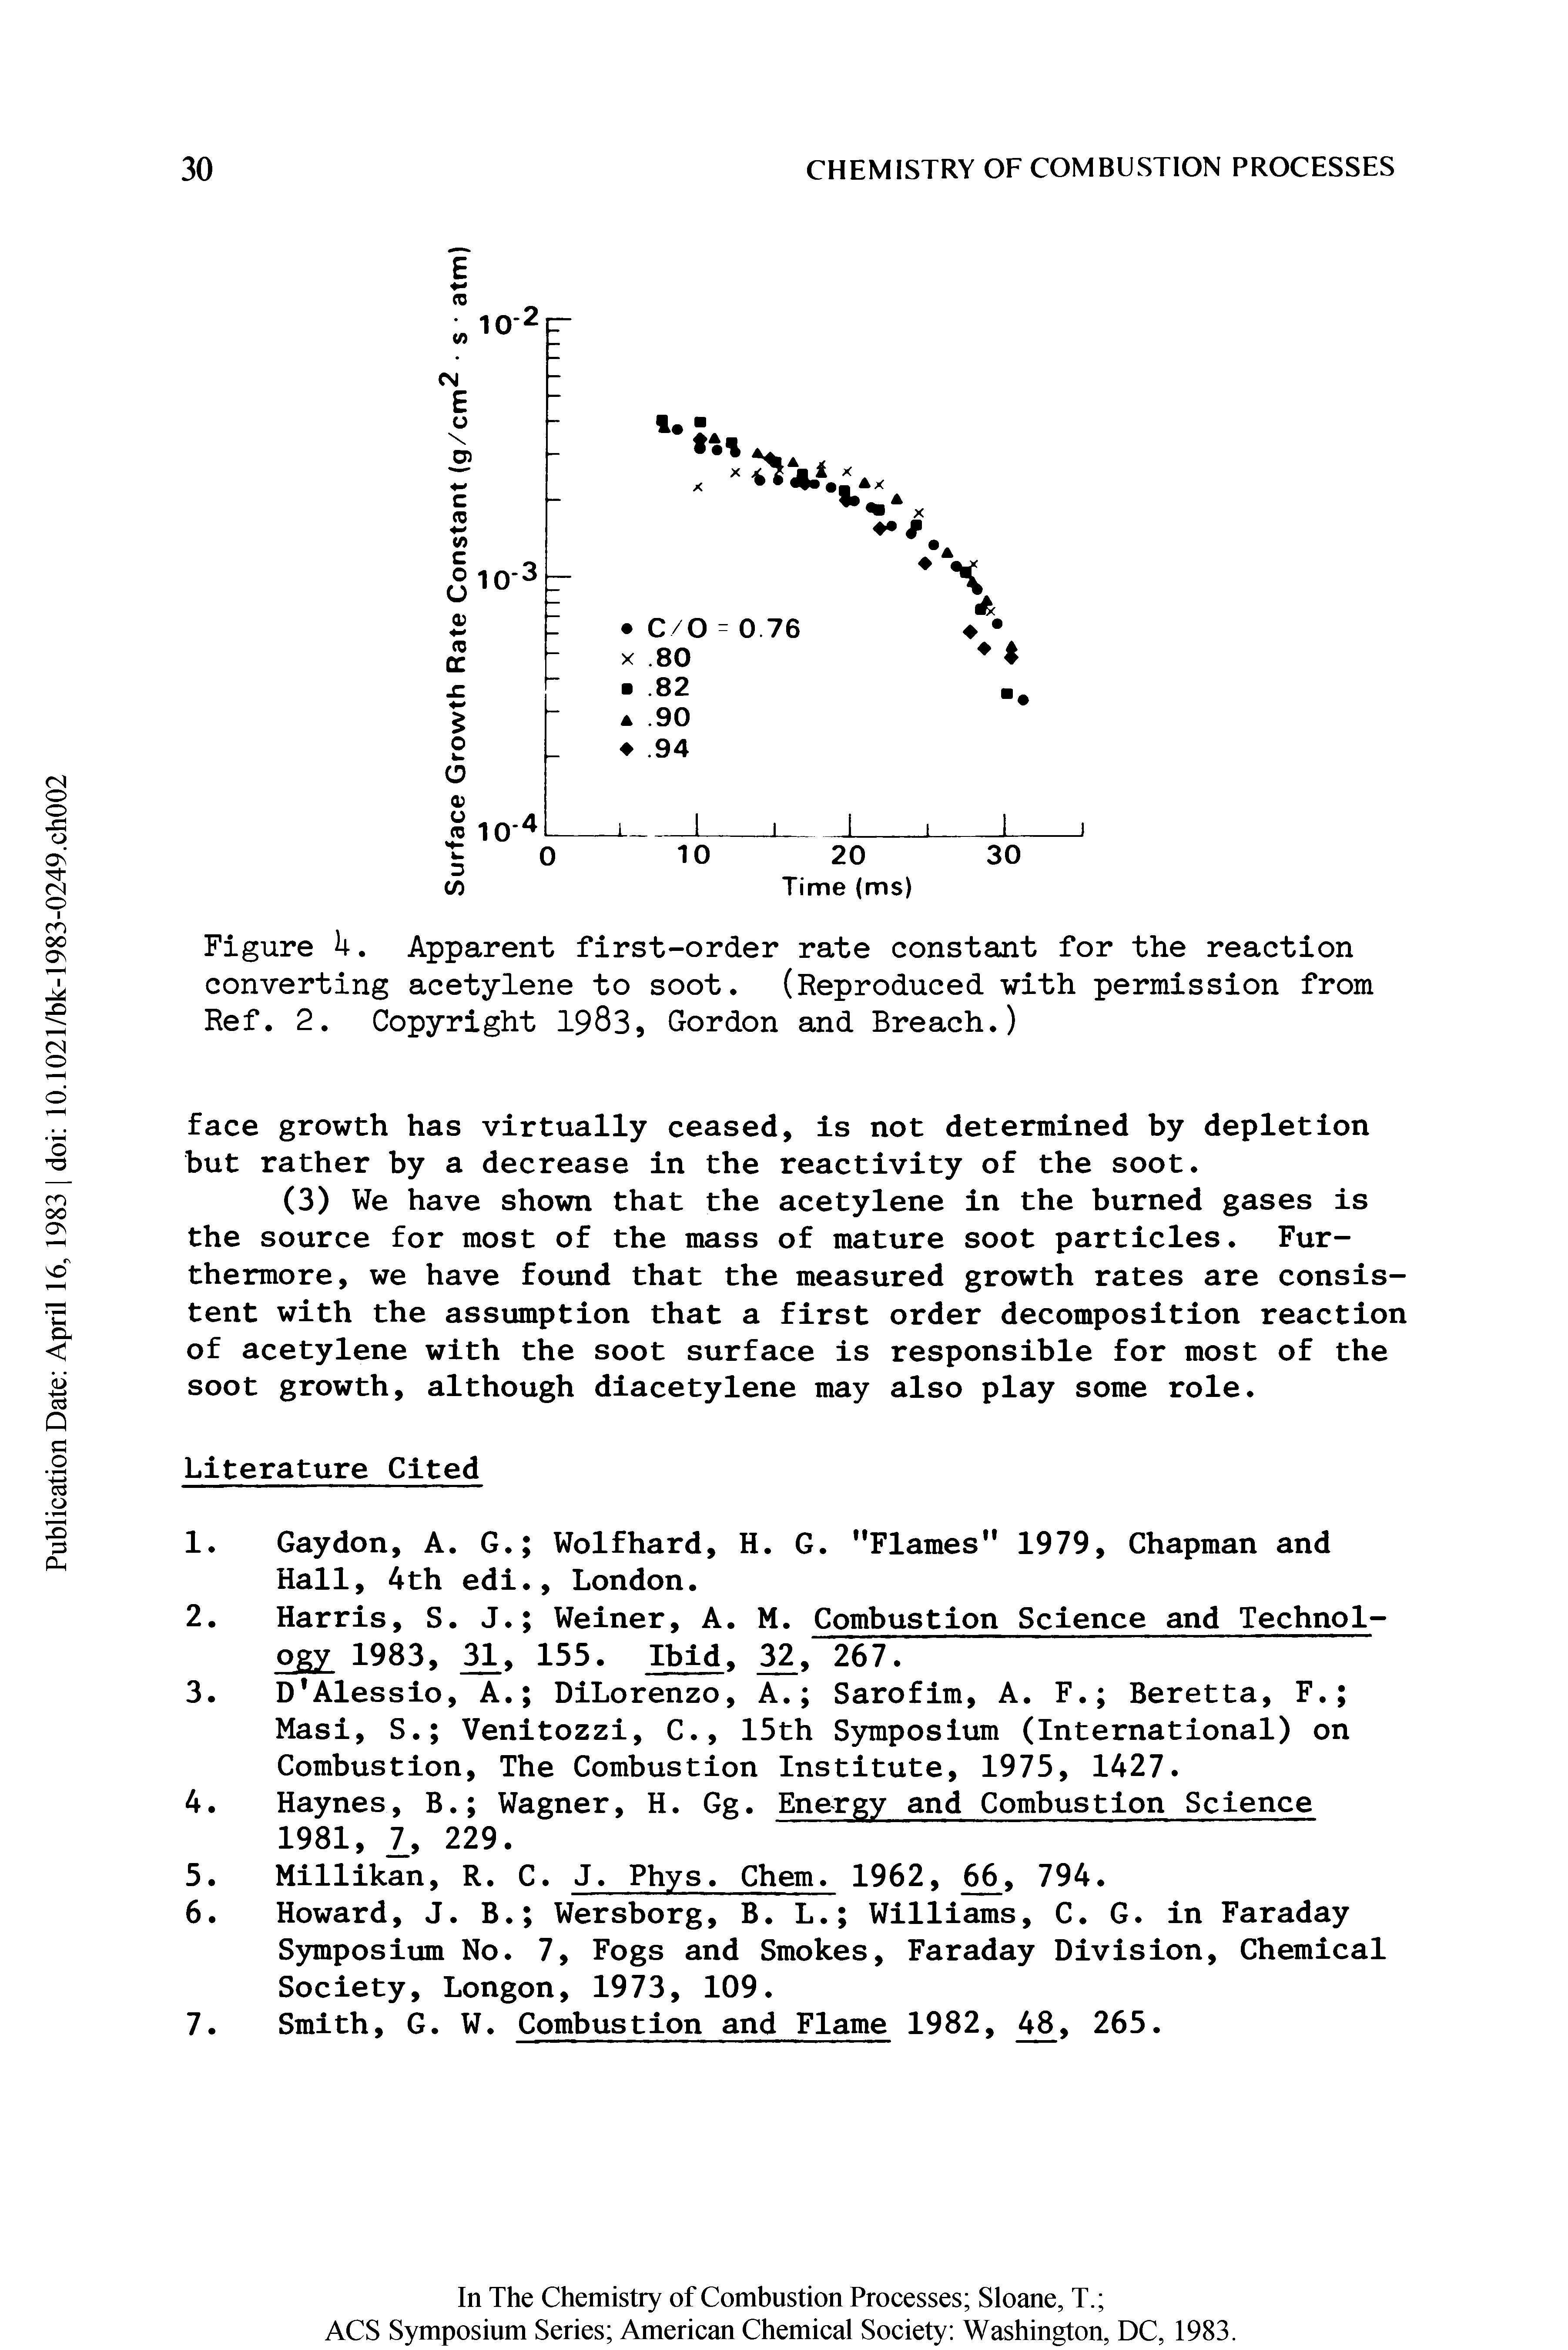 Figure U. Apparent first-order rate constant for the reaction converting acetylene to soot. (Reproduced -with permission from Ref. 2. Copyright 1983, Gordon and Breach.)...